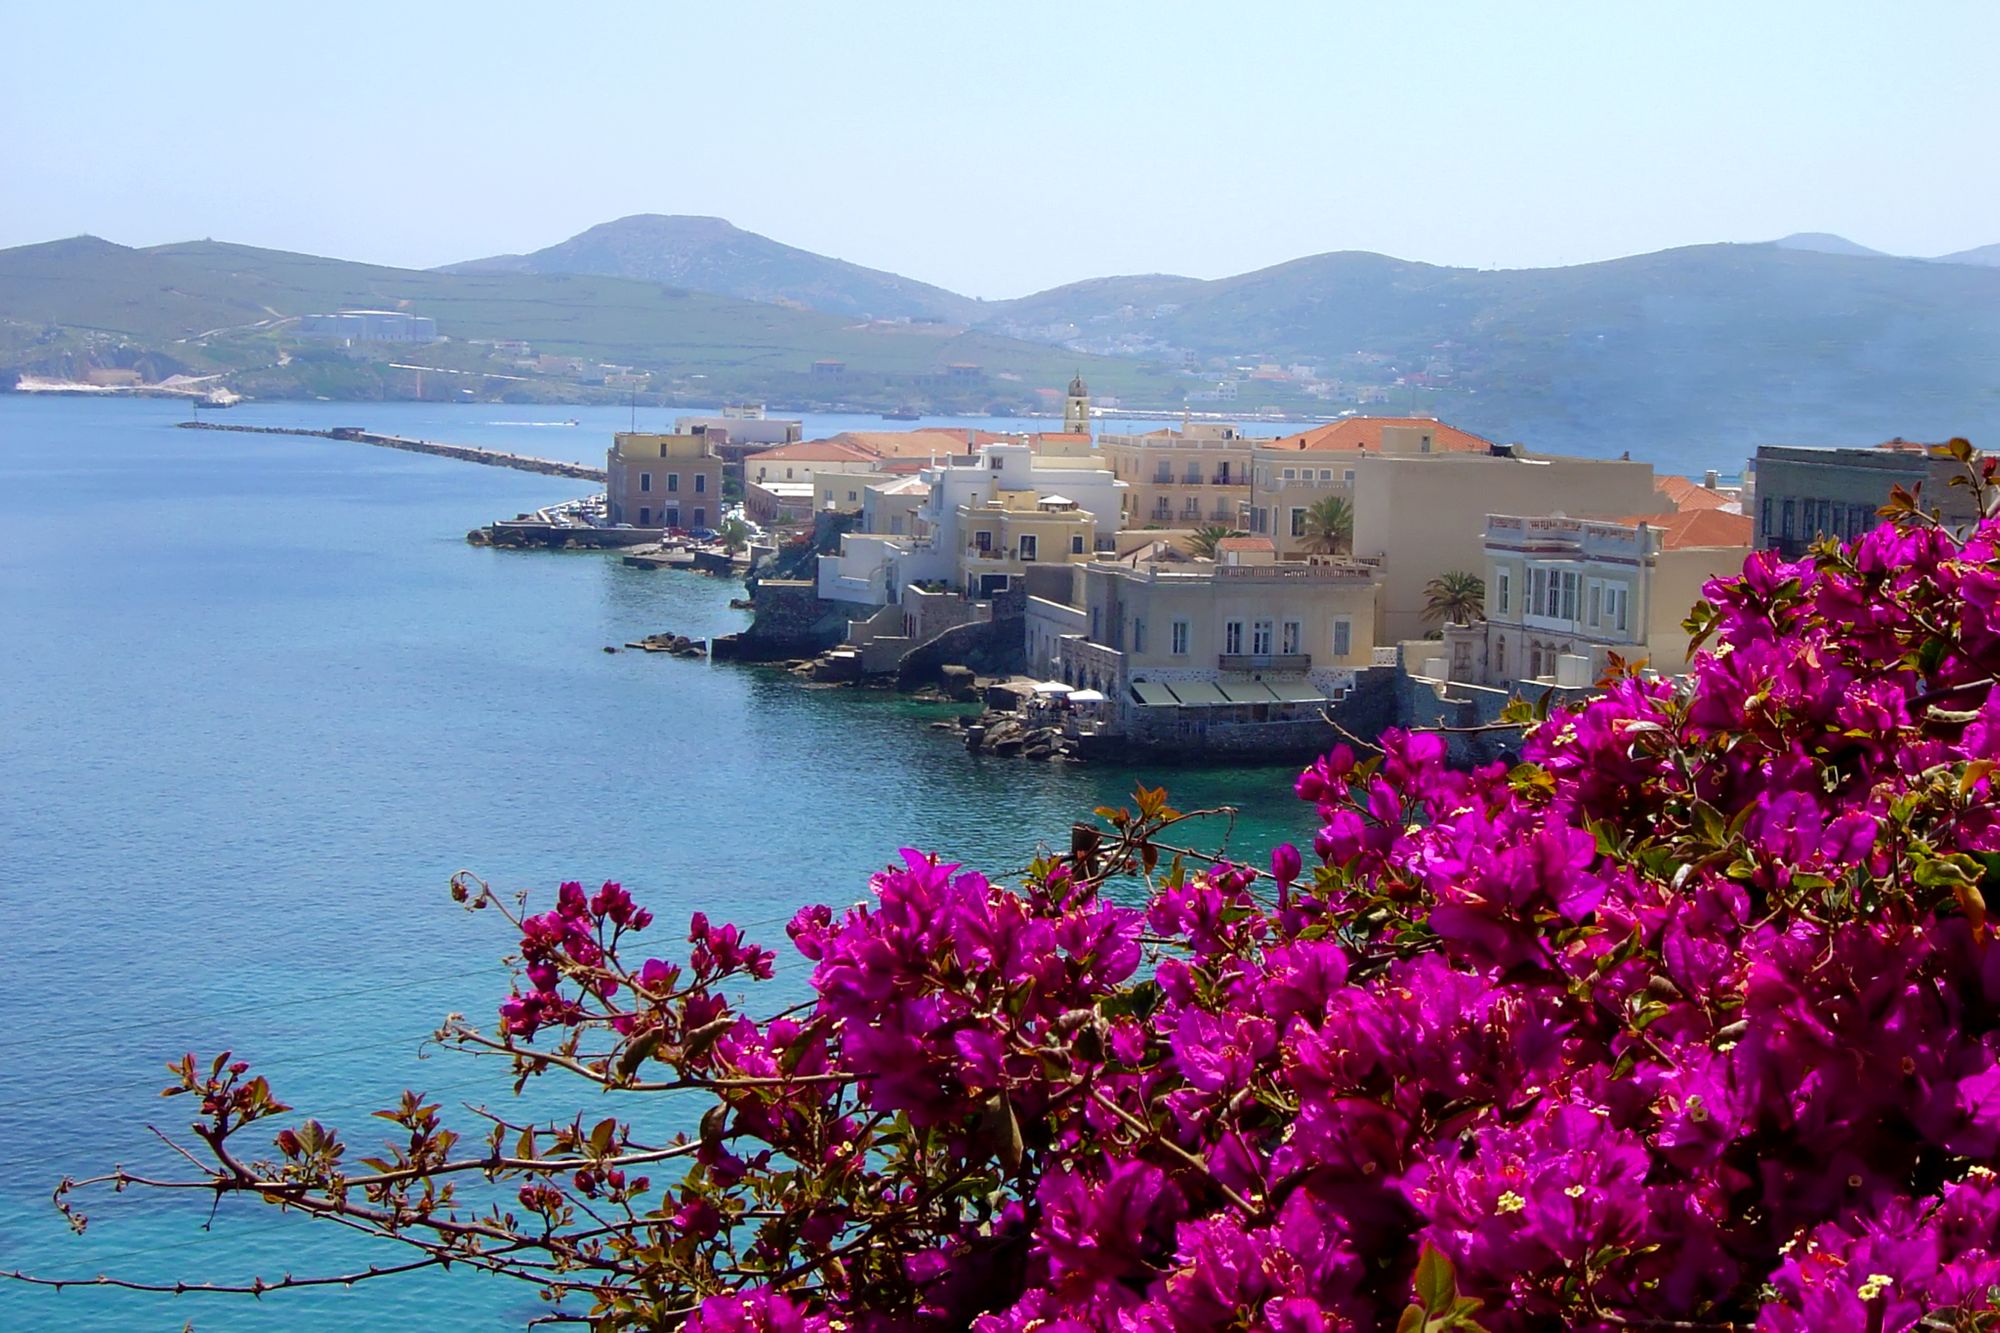 Sea view with a blooming rose pant and the picturesque houses of Syros in the background.